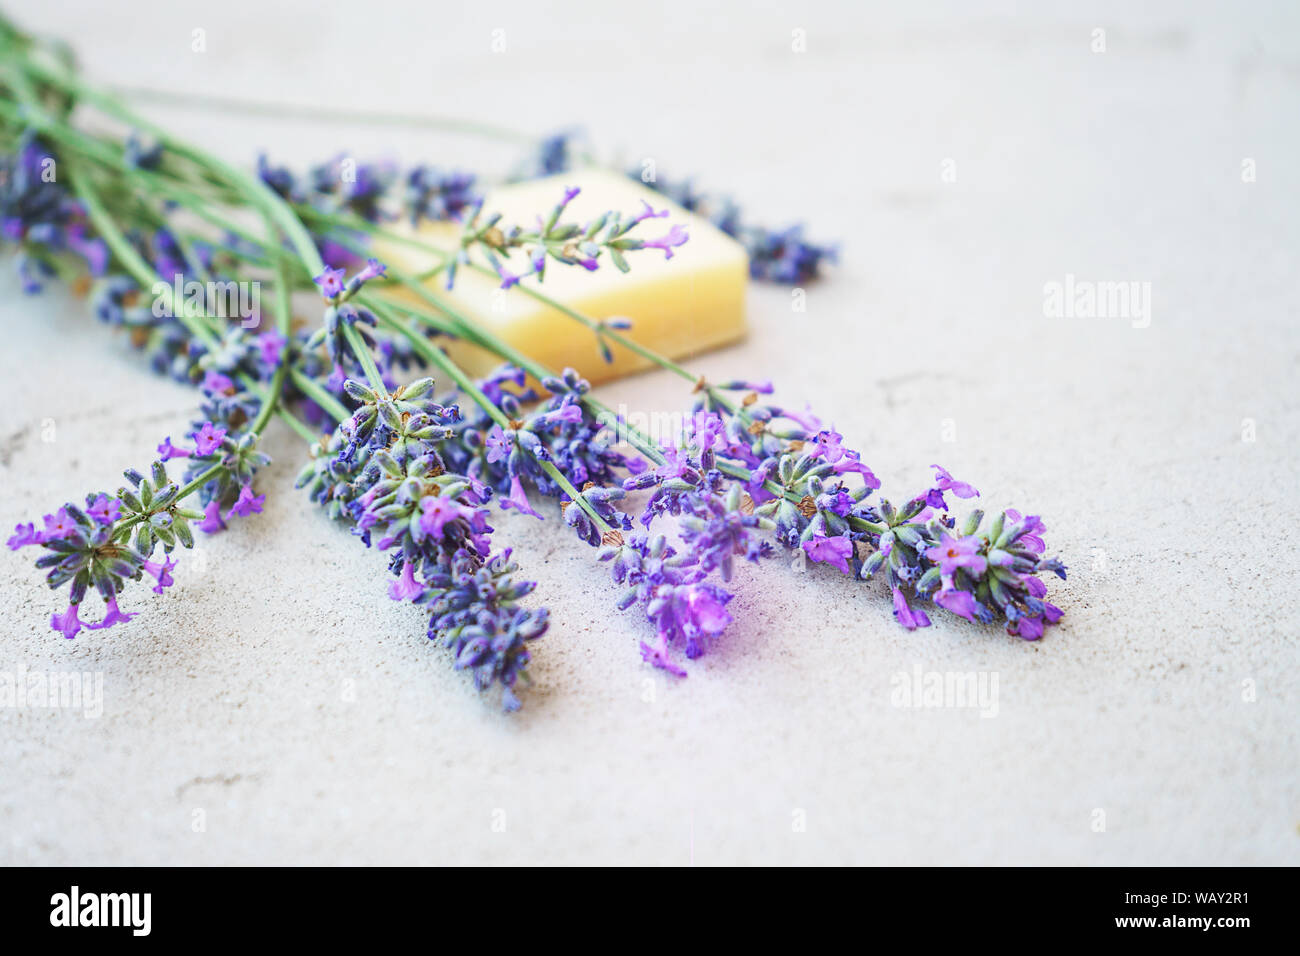 Lavender flowers and natural soap for bodycare on concrete background. Stock Photo